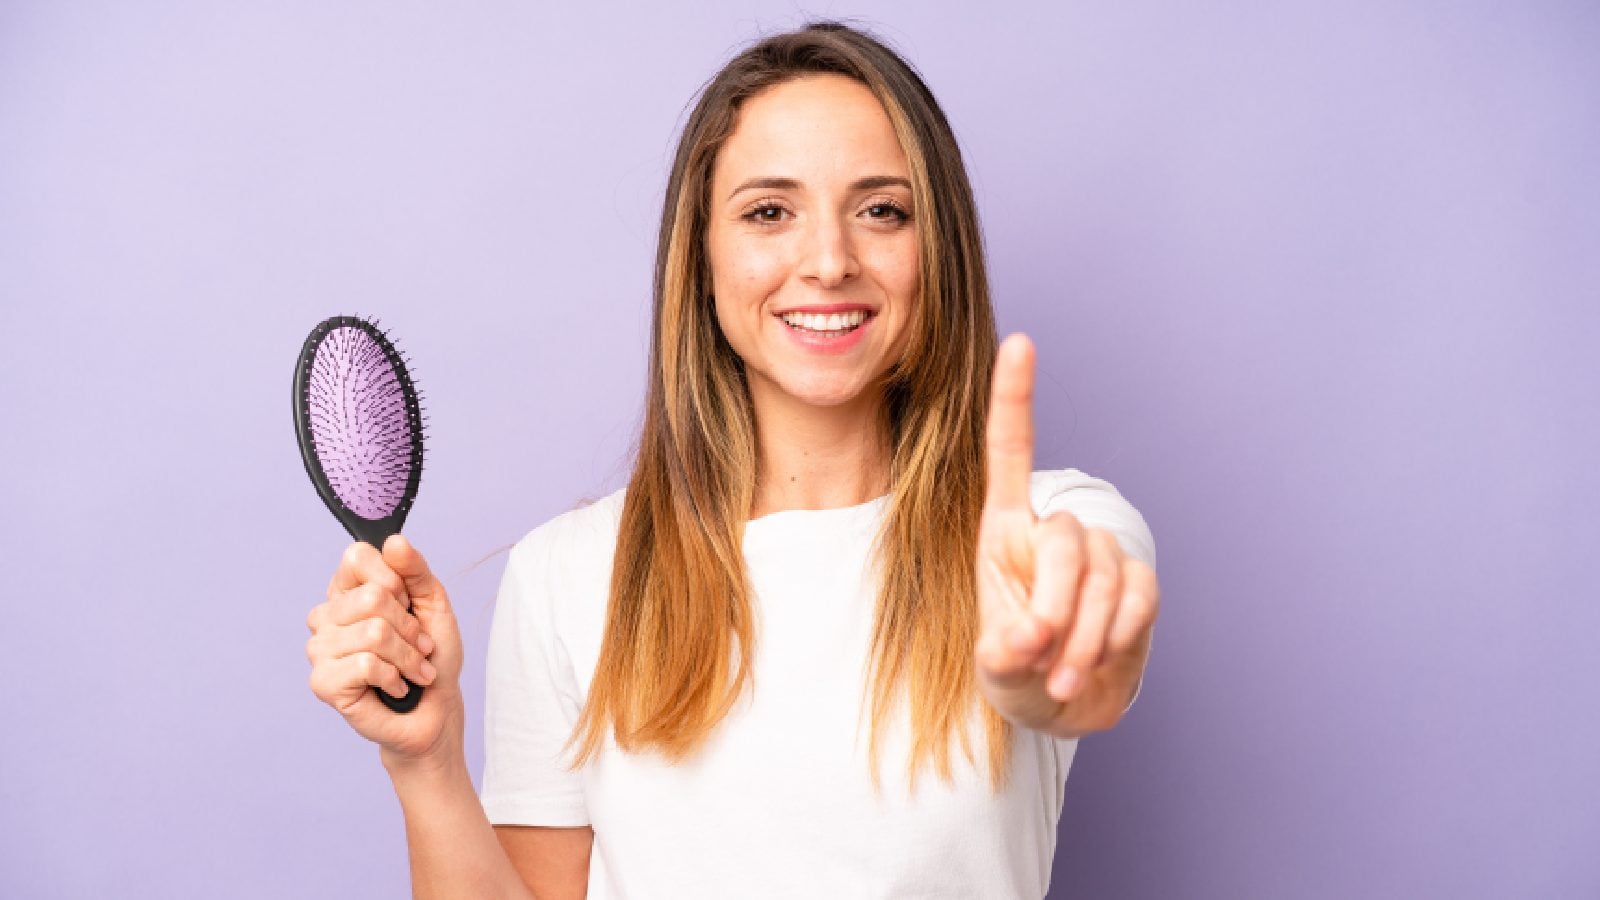 5 best LED hair therapy combs for hair growth and scalp massage